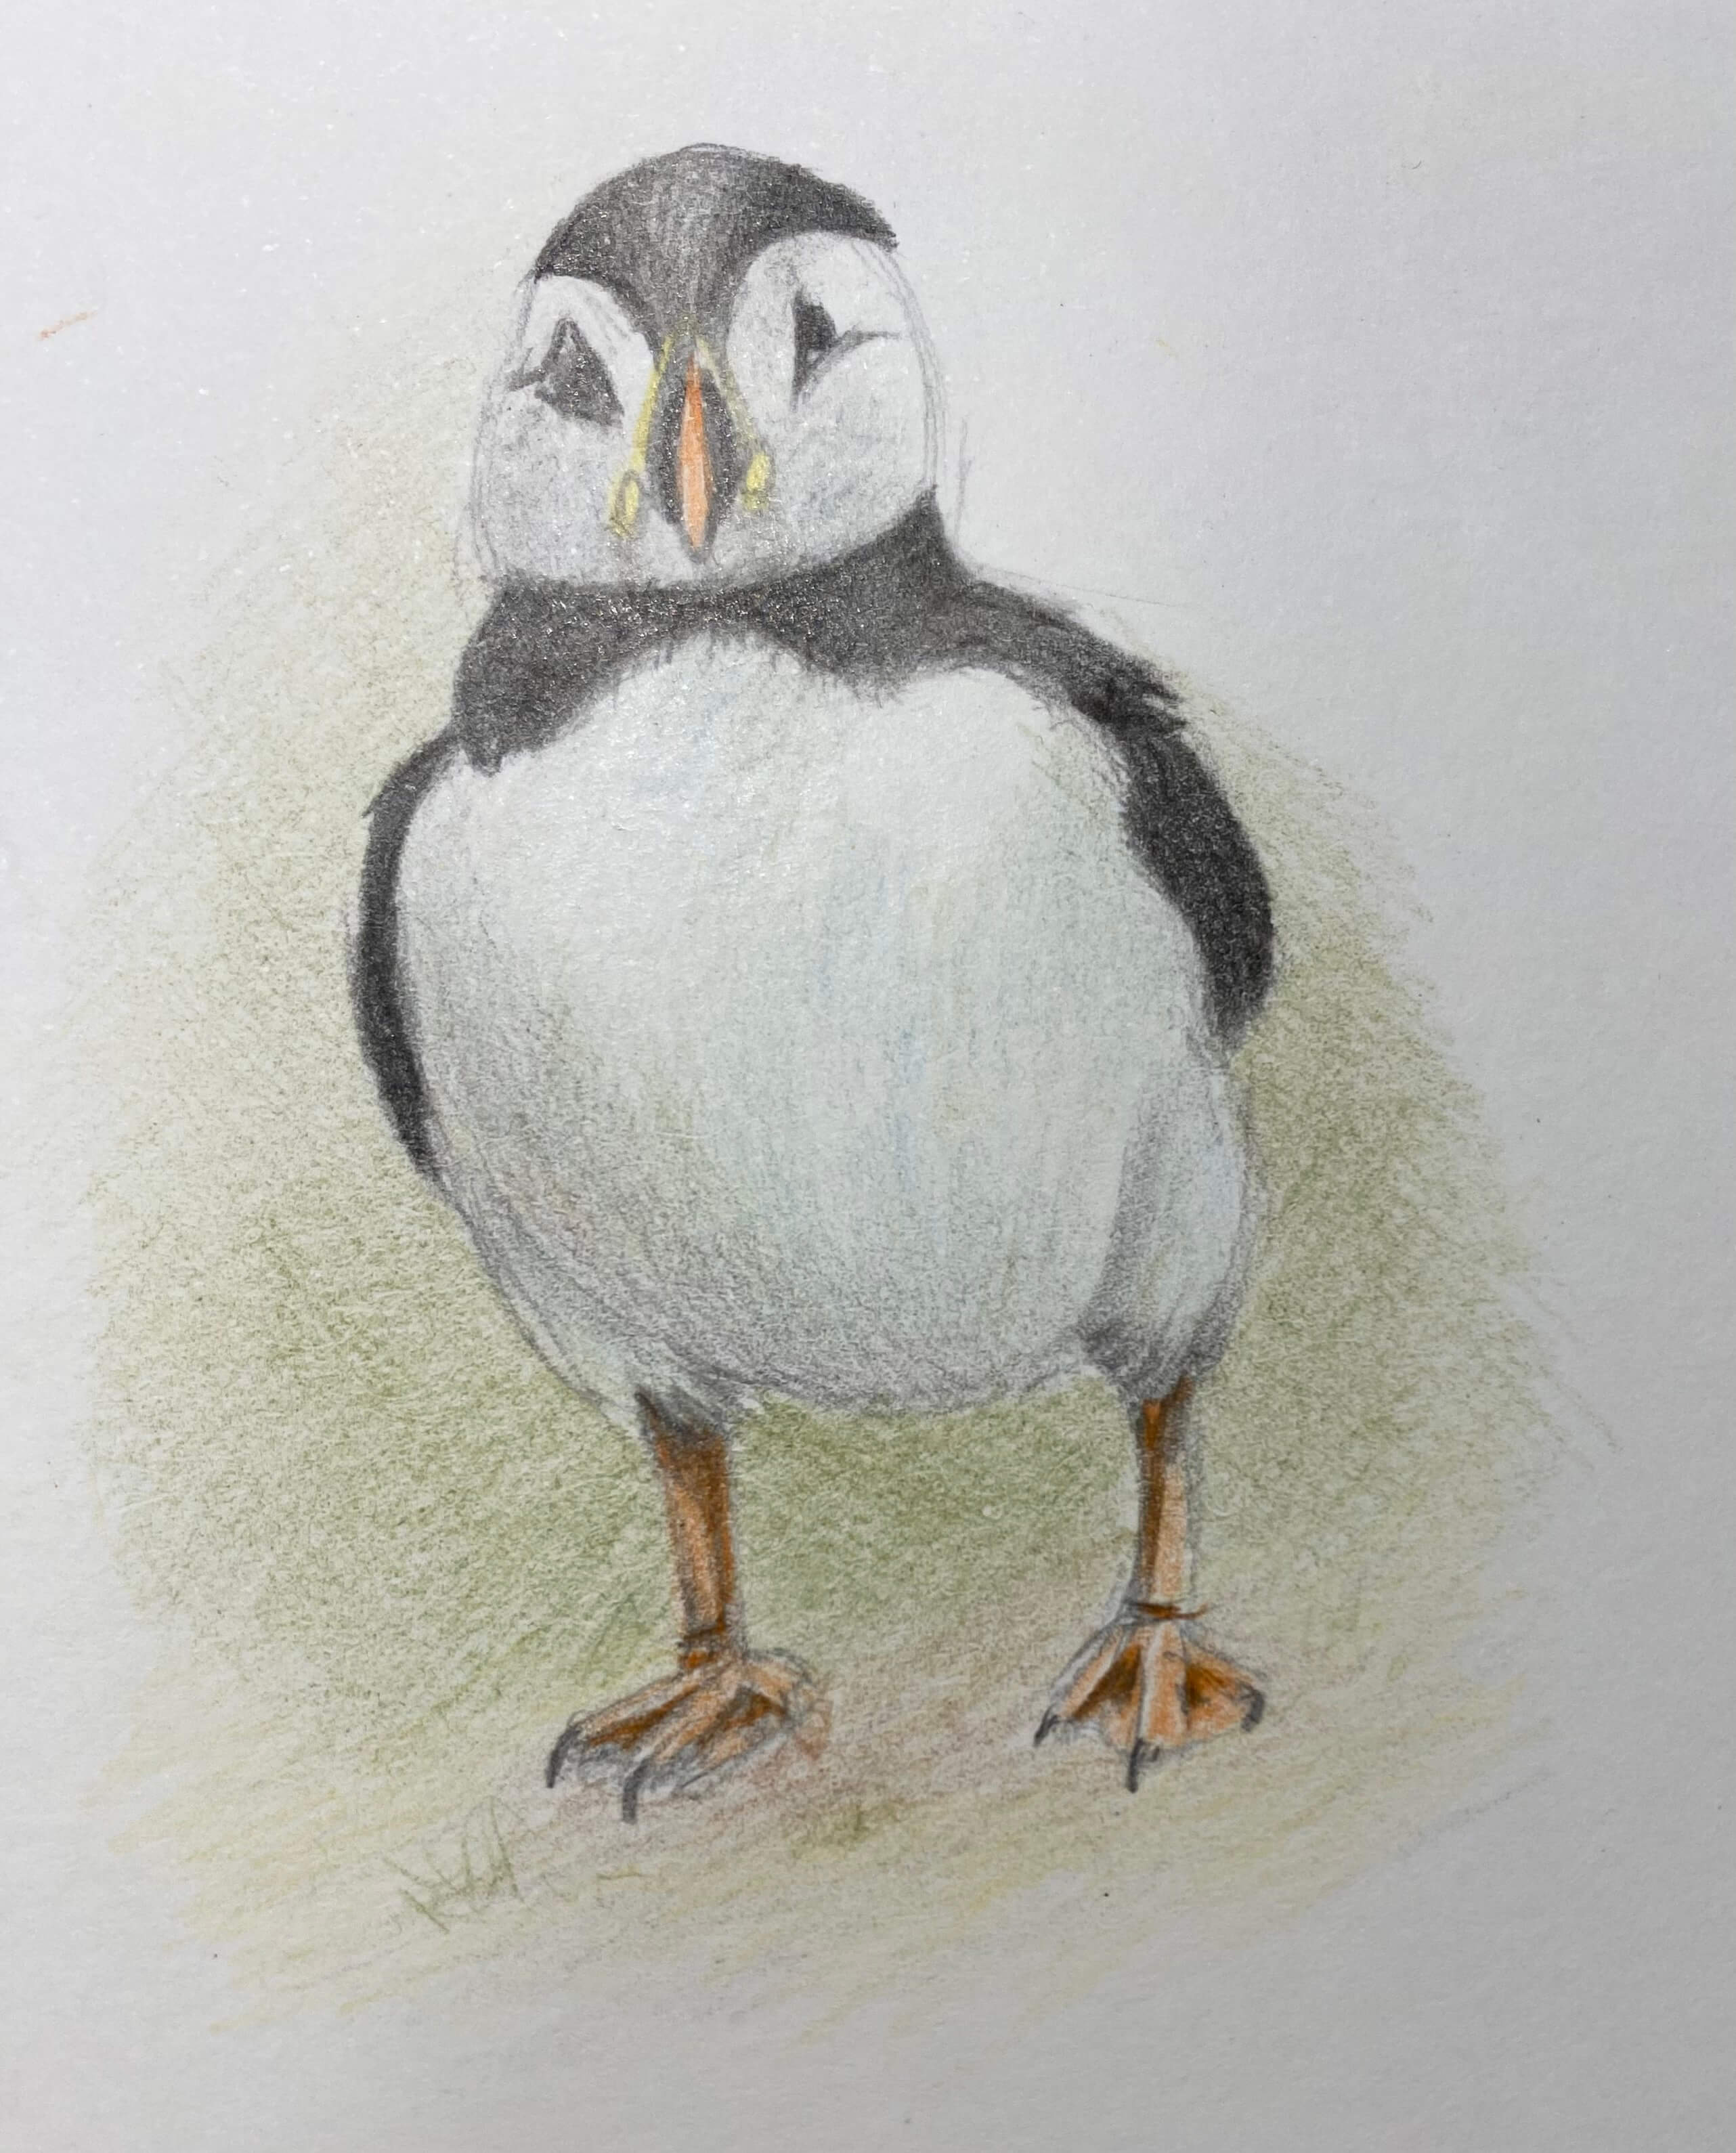 https://www.pencil-topics.co.uk/images/puffin-not-blended.jpg